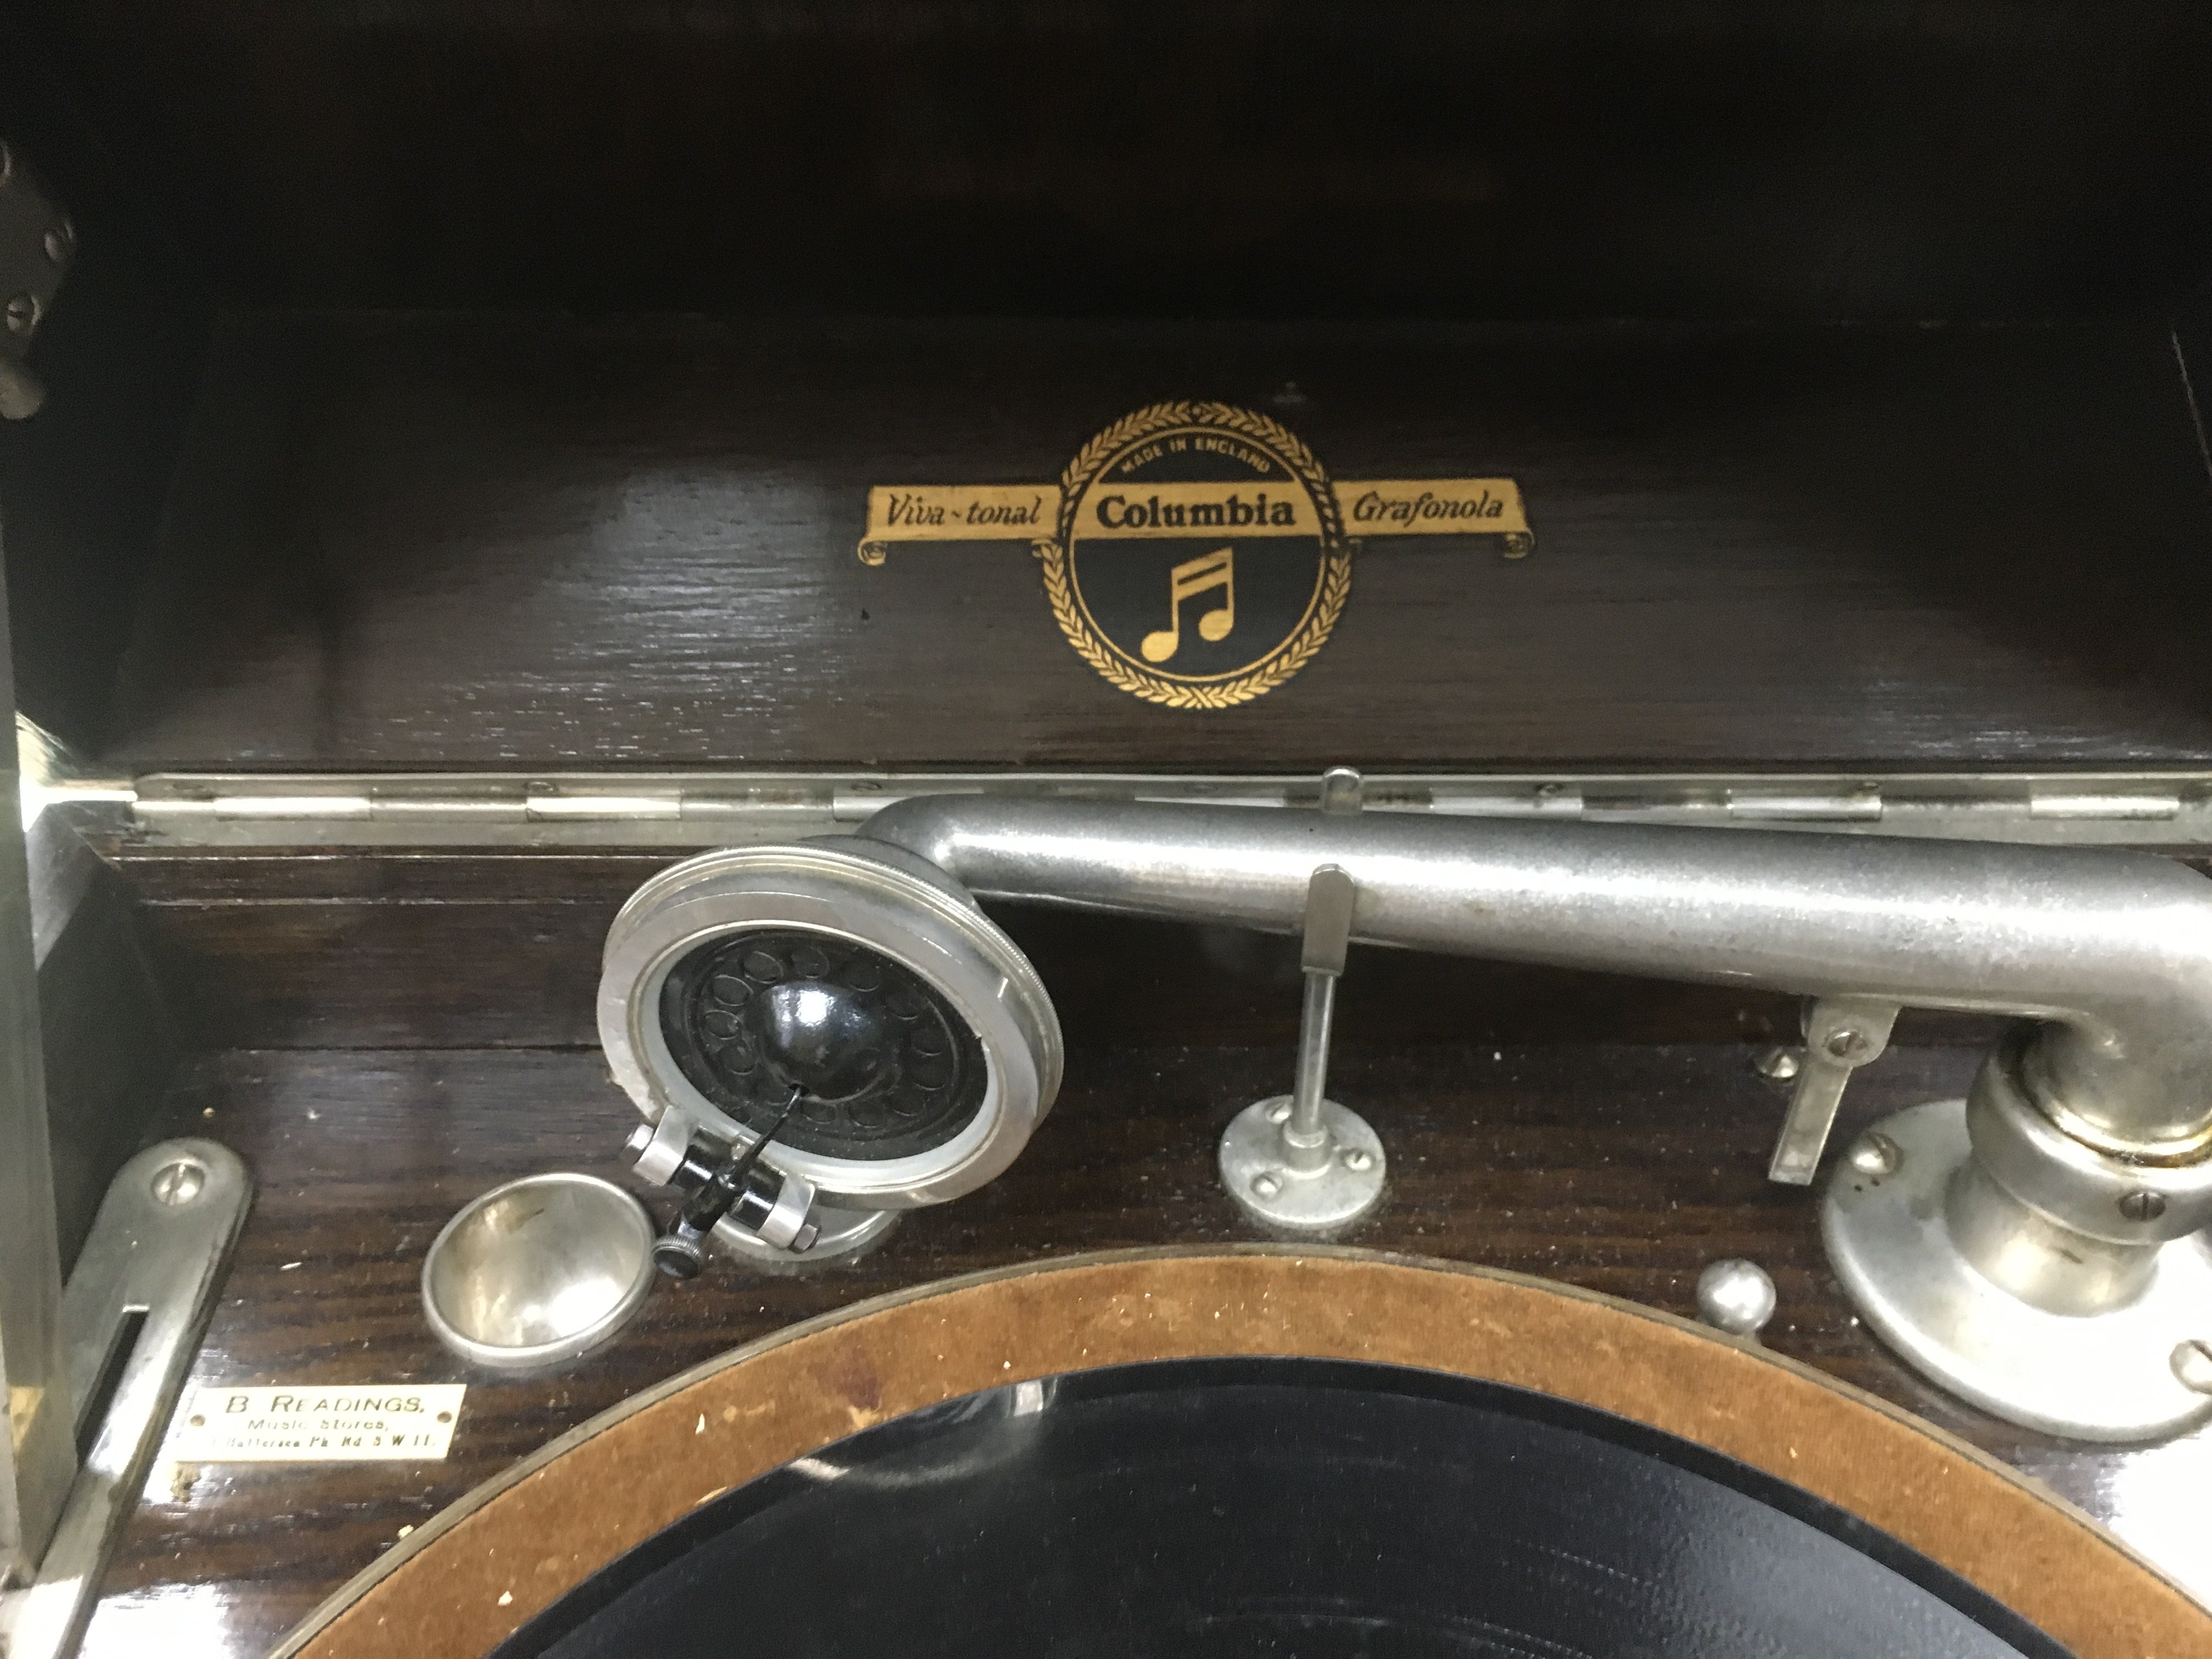 A Columbia 119 gramophone with inegrated soundbox. - Image 2 of 3